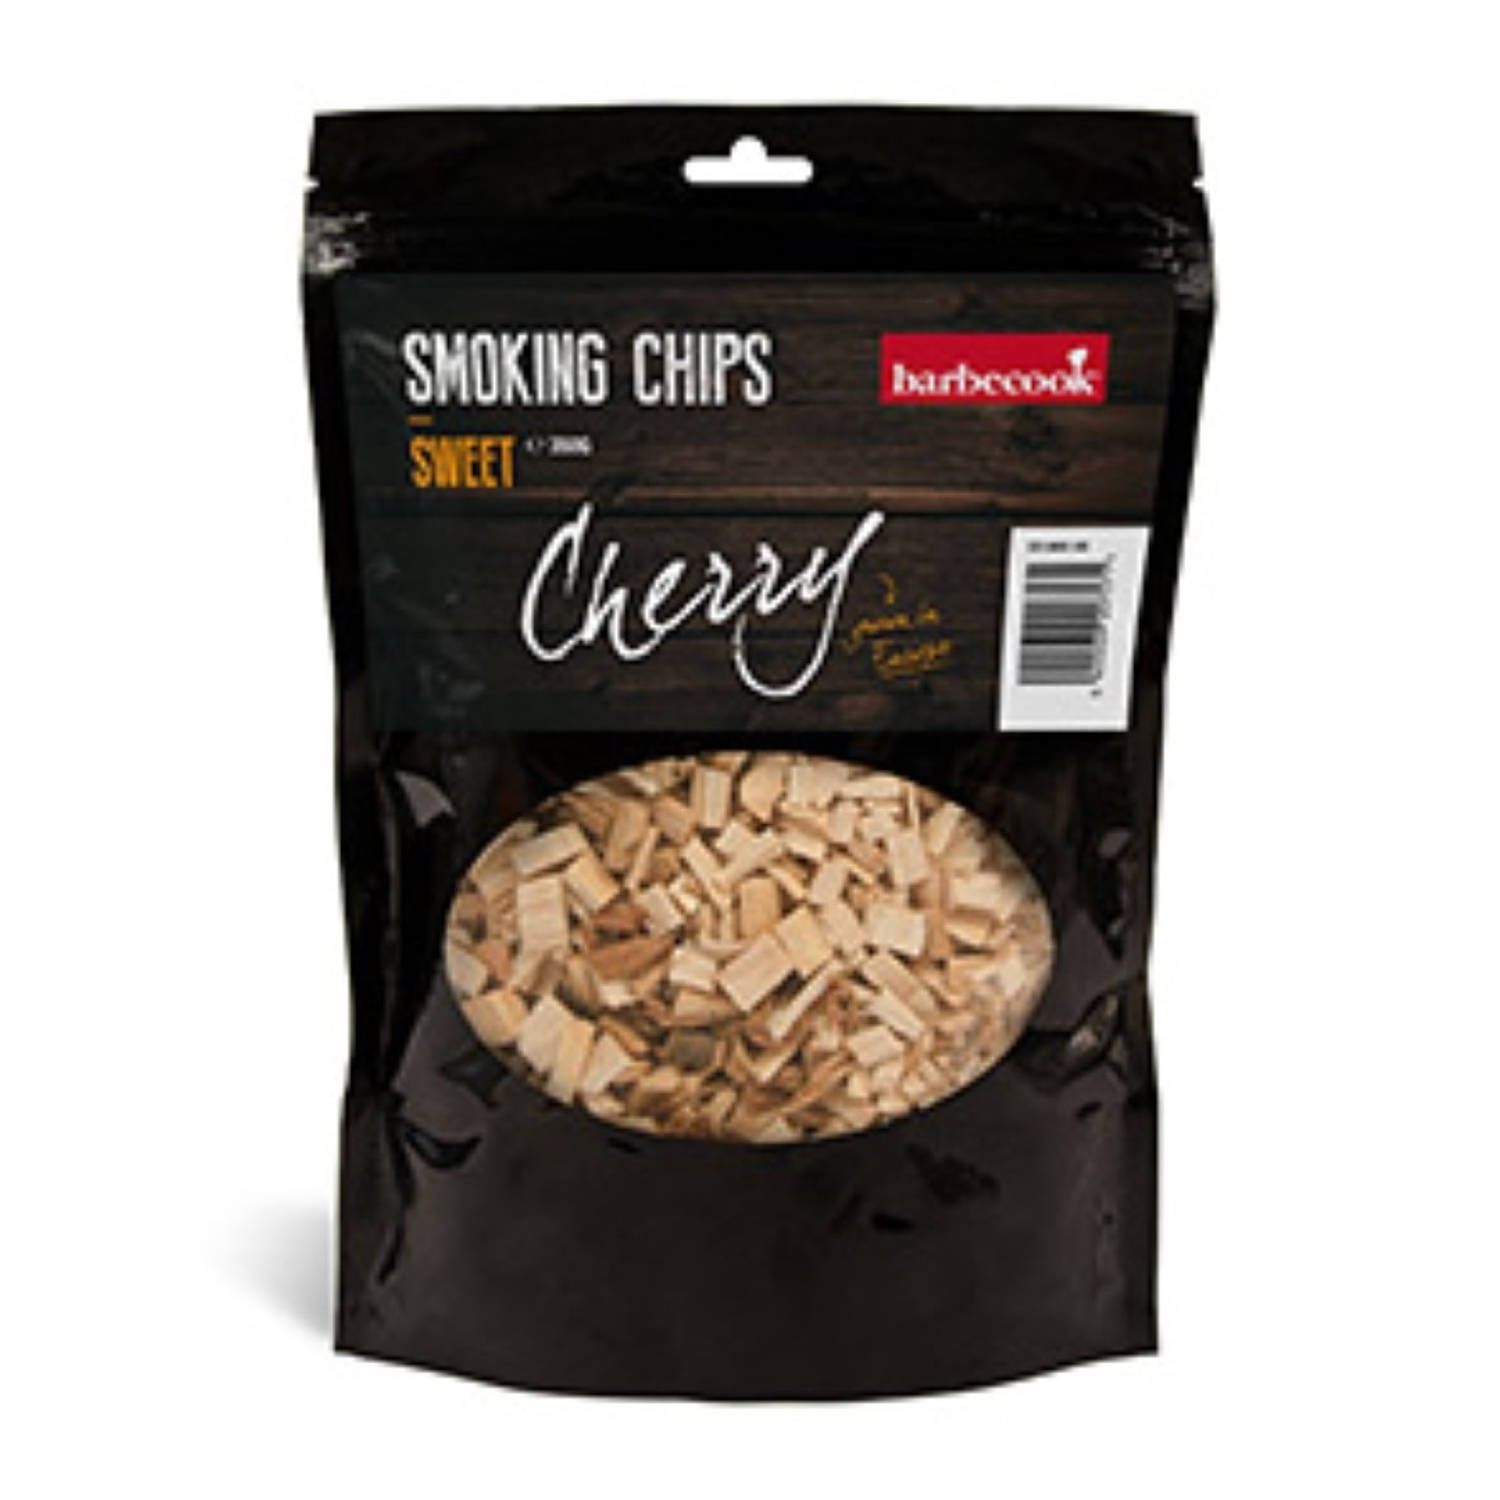 Rookchips Kers Barbecook